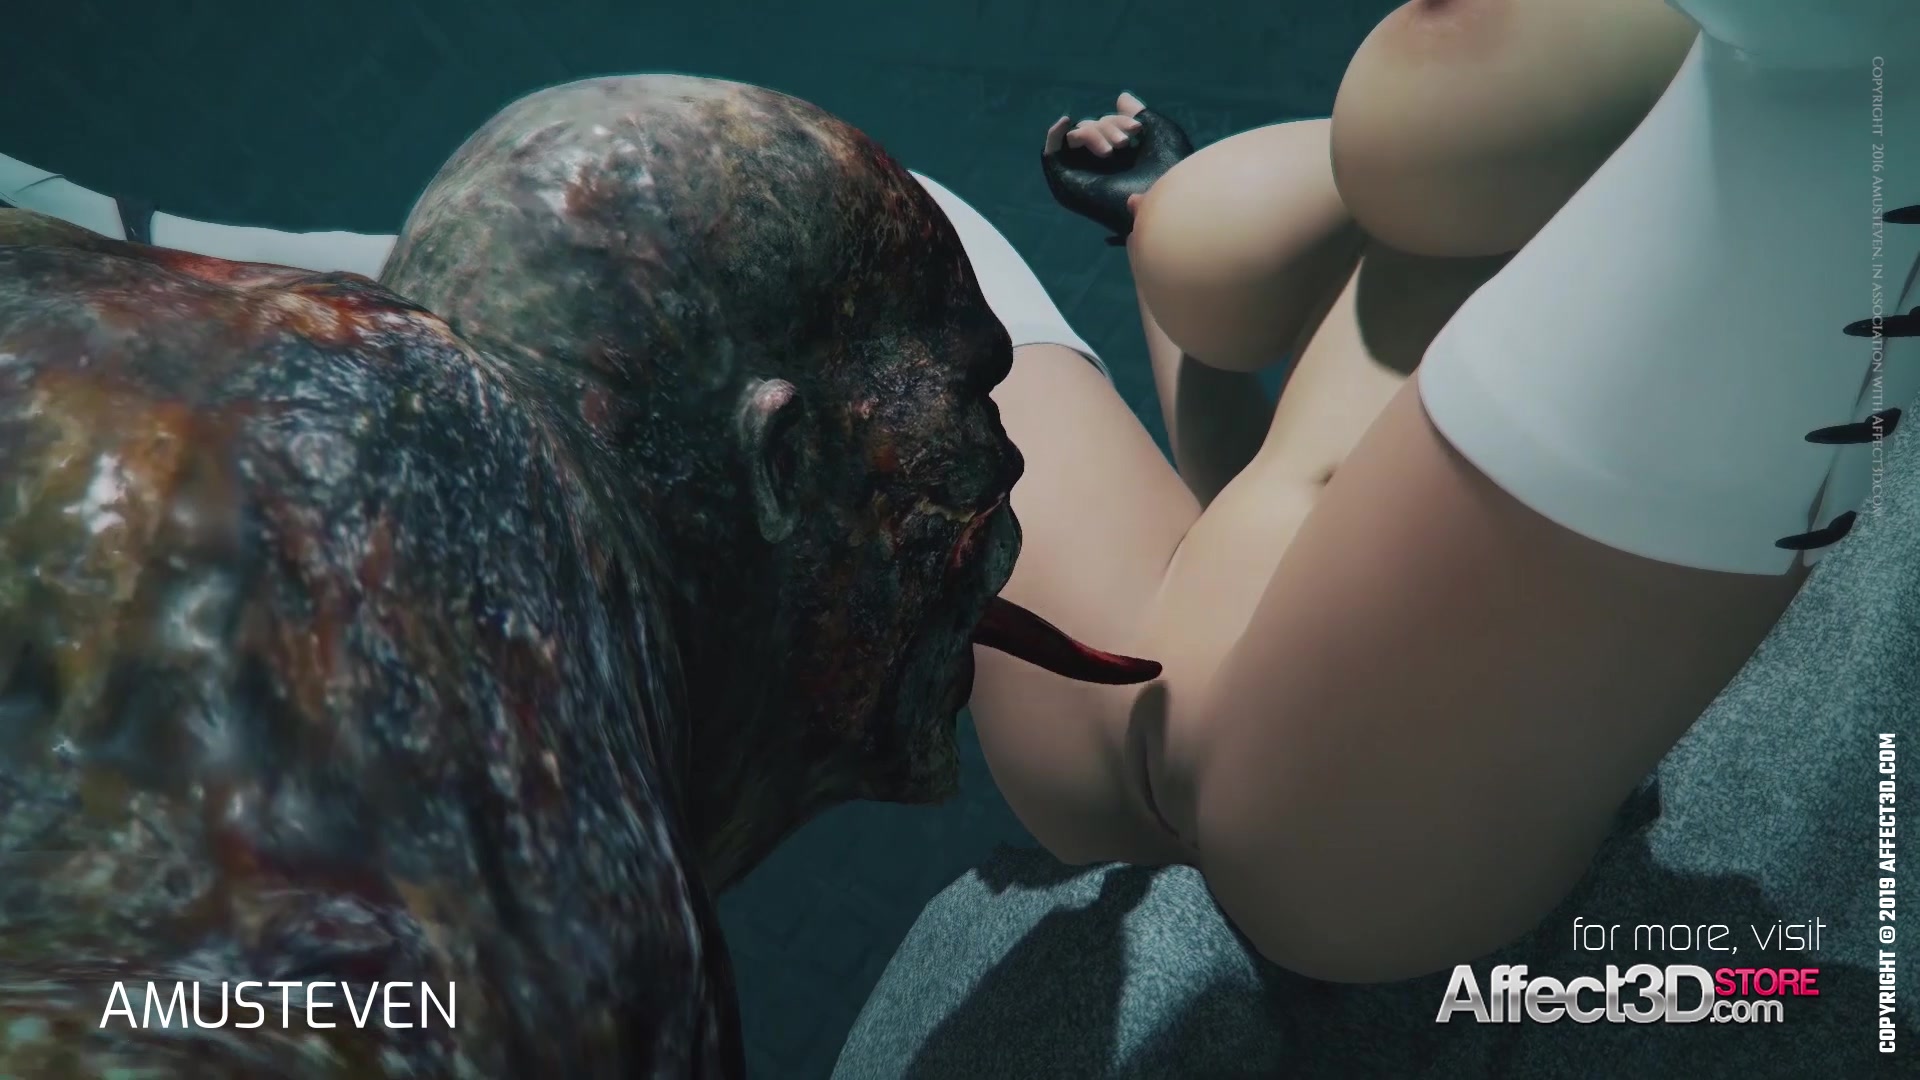 Animated Cartoon Monster Sex - 3d animation monster sex with a redhead big tits babe